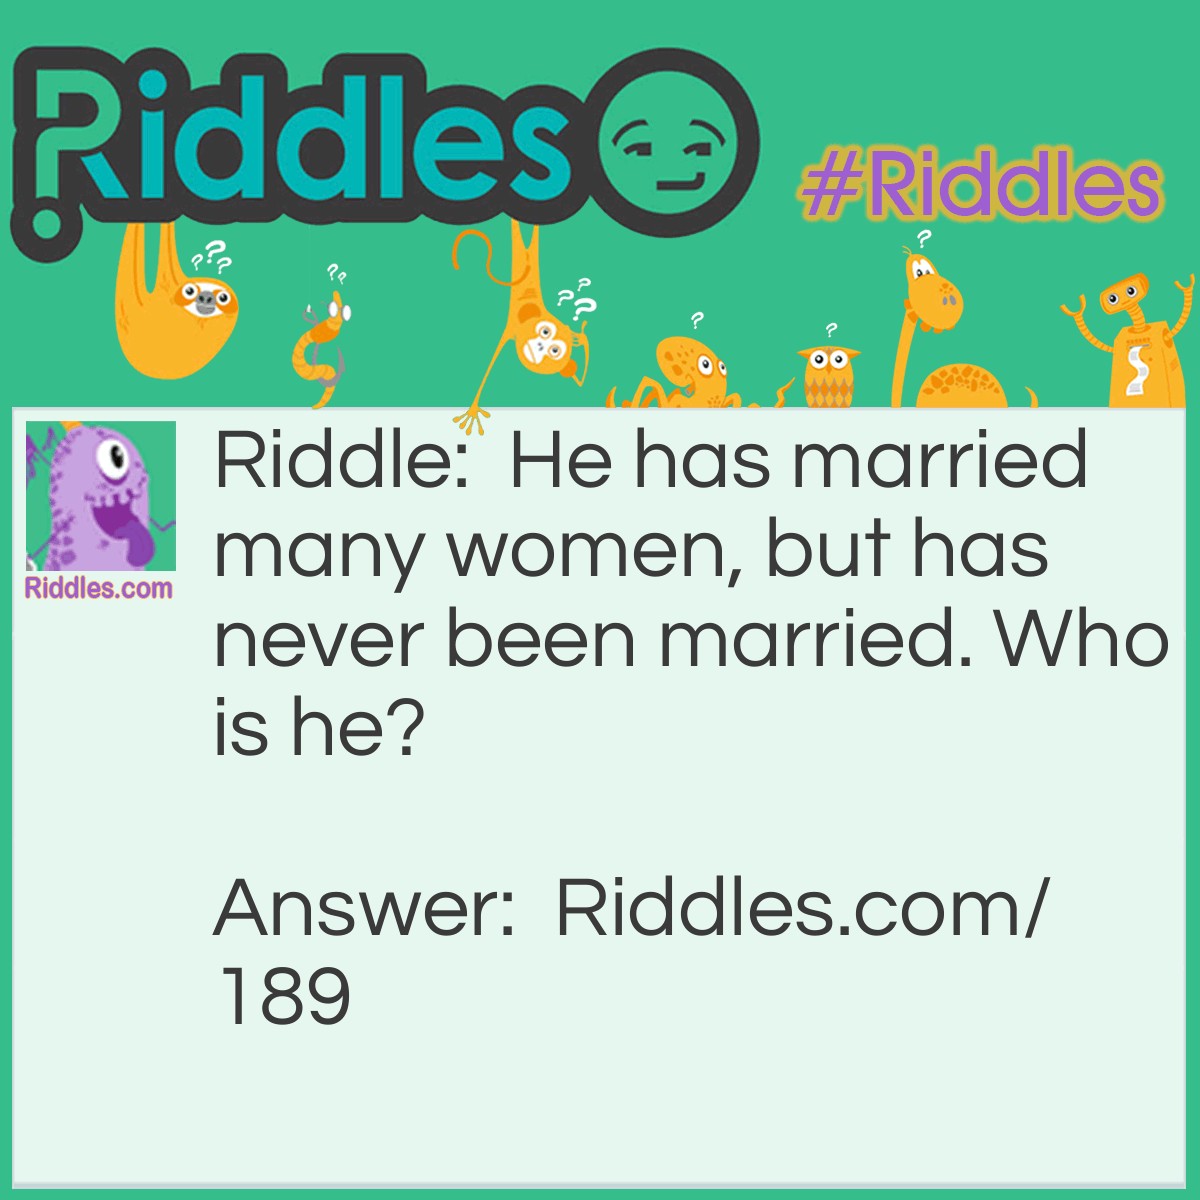 Riddle: He has married many women, but has never been married. Who is he? Answer: A preacher.